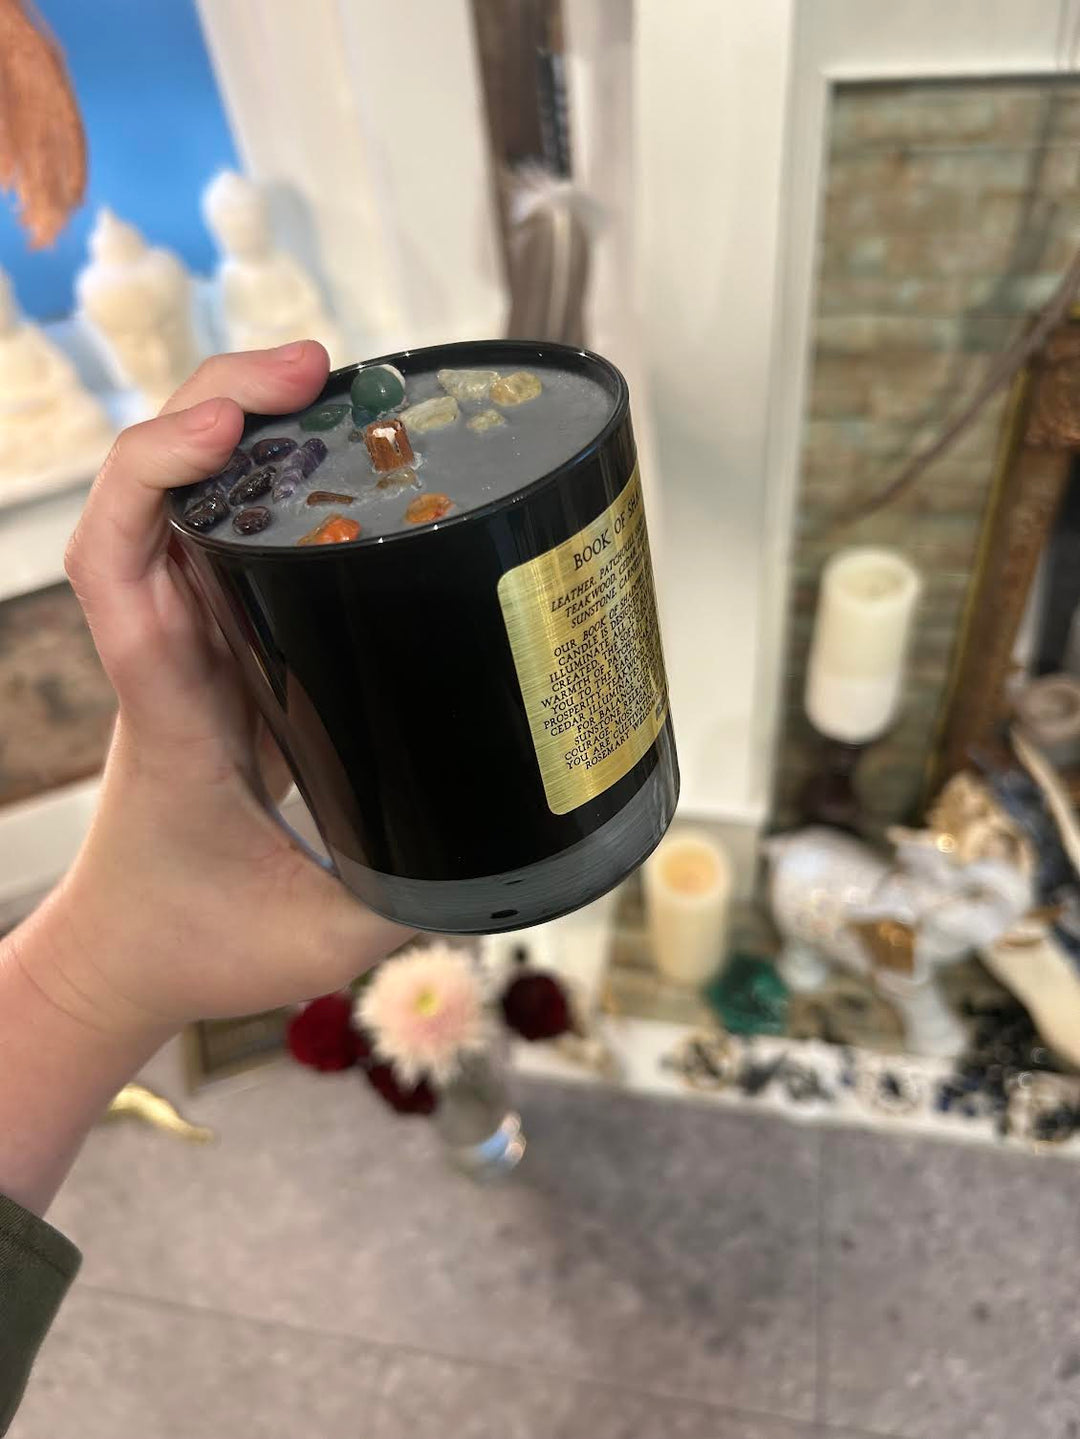 This is the length of the Book Of Shadows candle